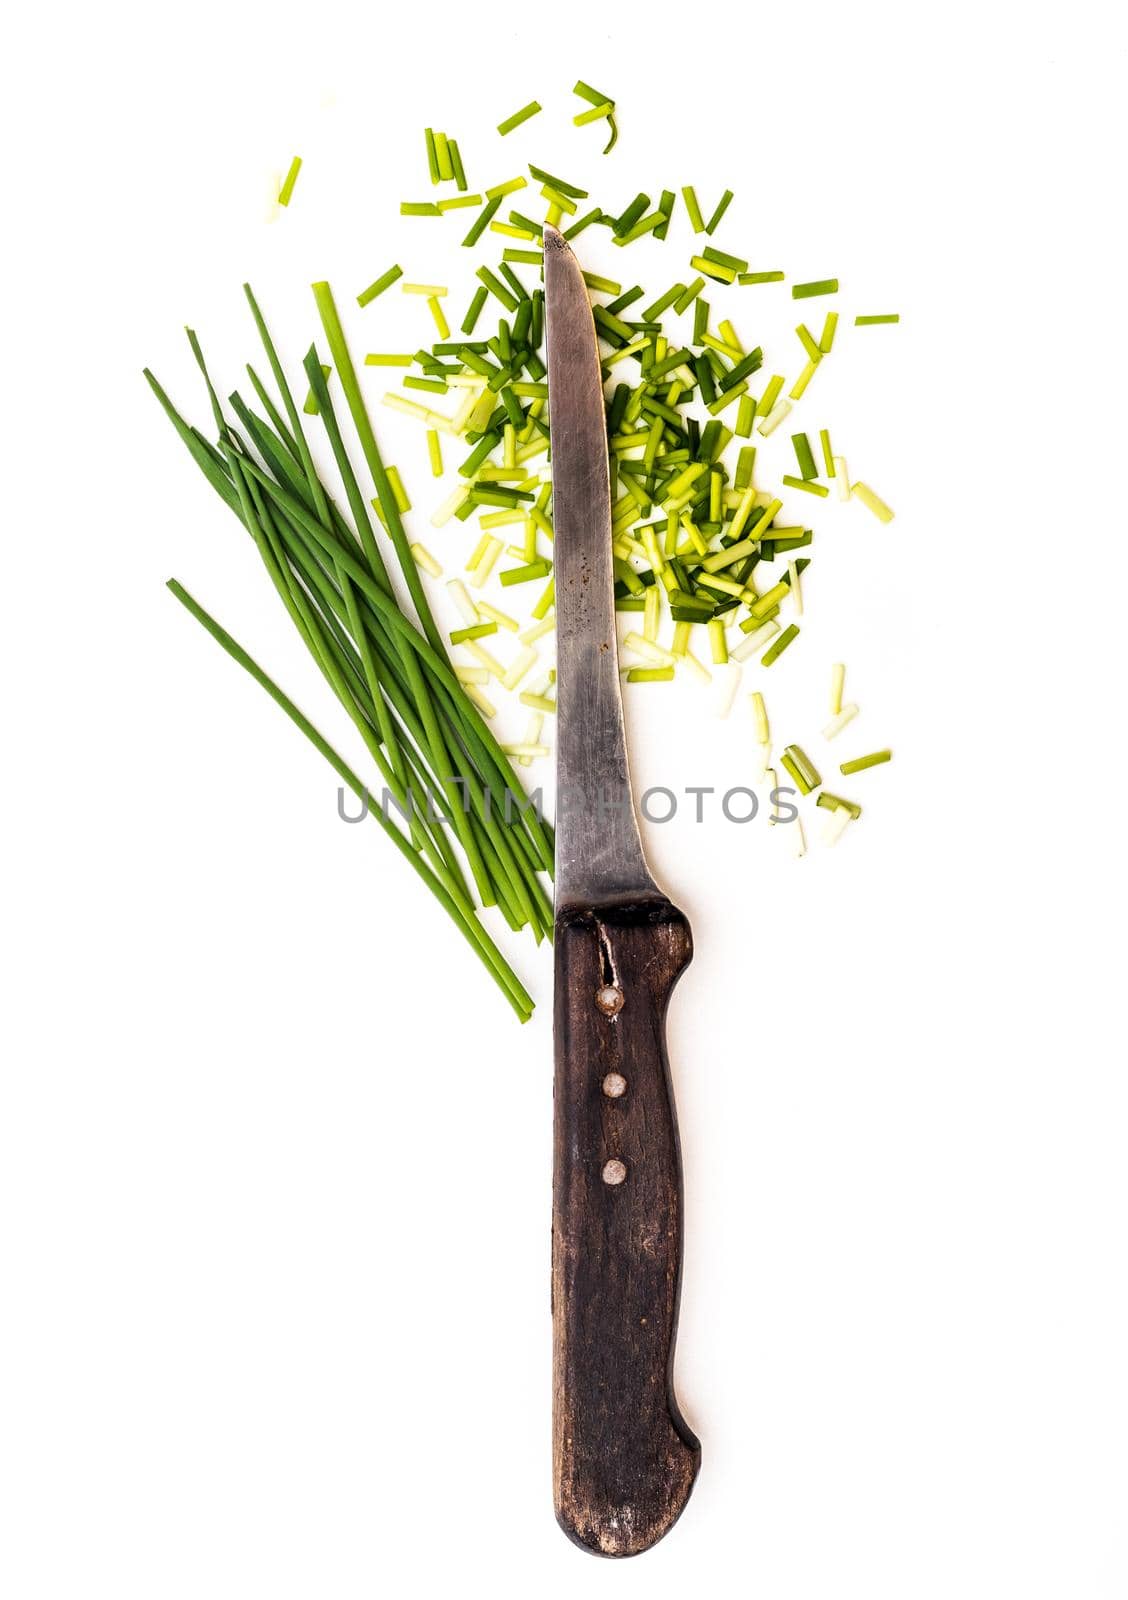 kitchen knife and green onions isolated on white background